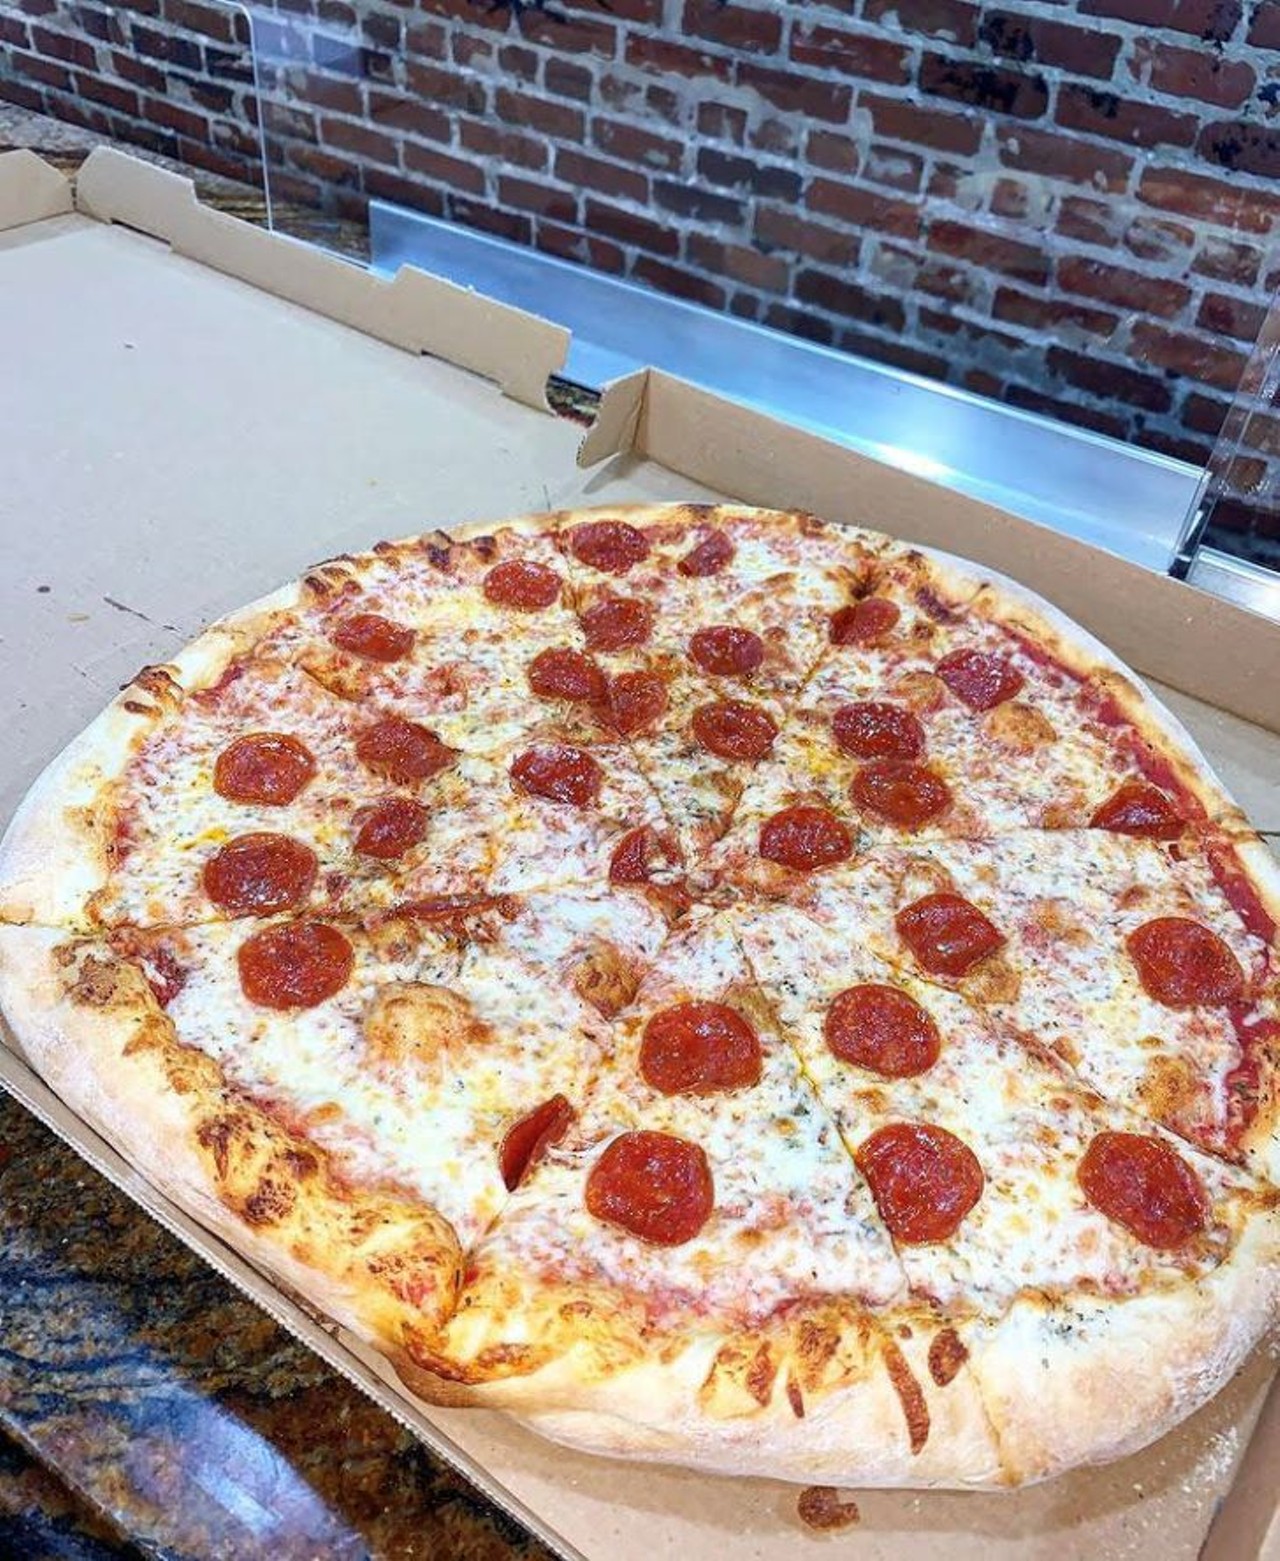 Gitto&#146;s Pizza 
120 S. Orange Ave. 
Celebrate national pizza day with your favorite pizza style at downtown's Gitto&#146;s, where you can order traditional NY-style, stuffed crust, or Sicilian square pizza. 
Photo via Gitto&#146;s Pizza/Instagram